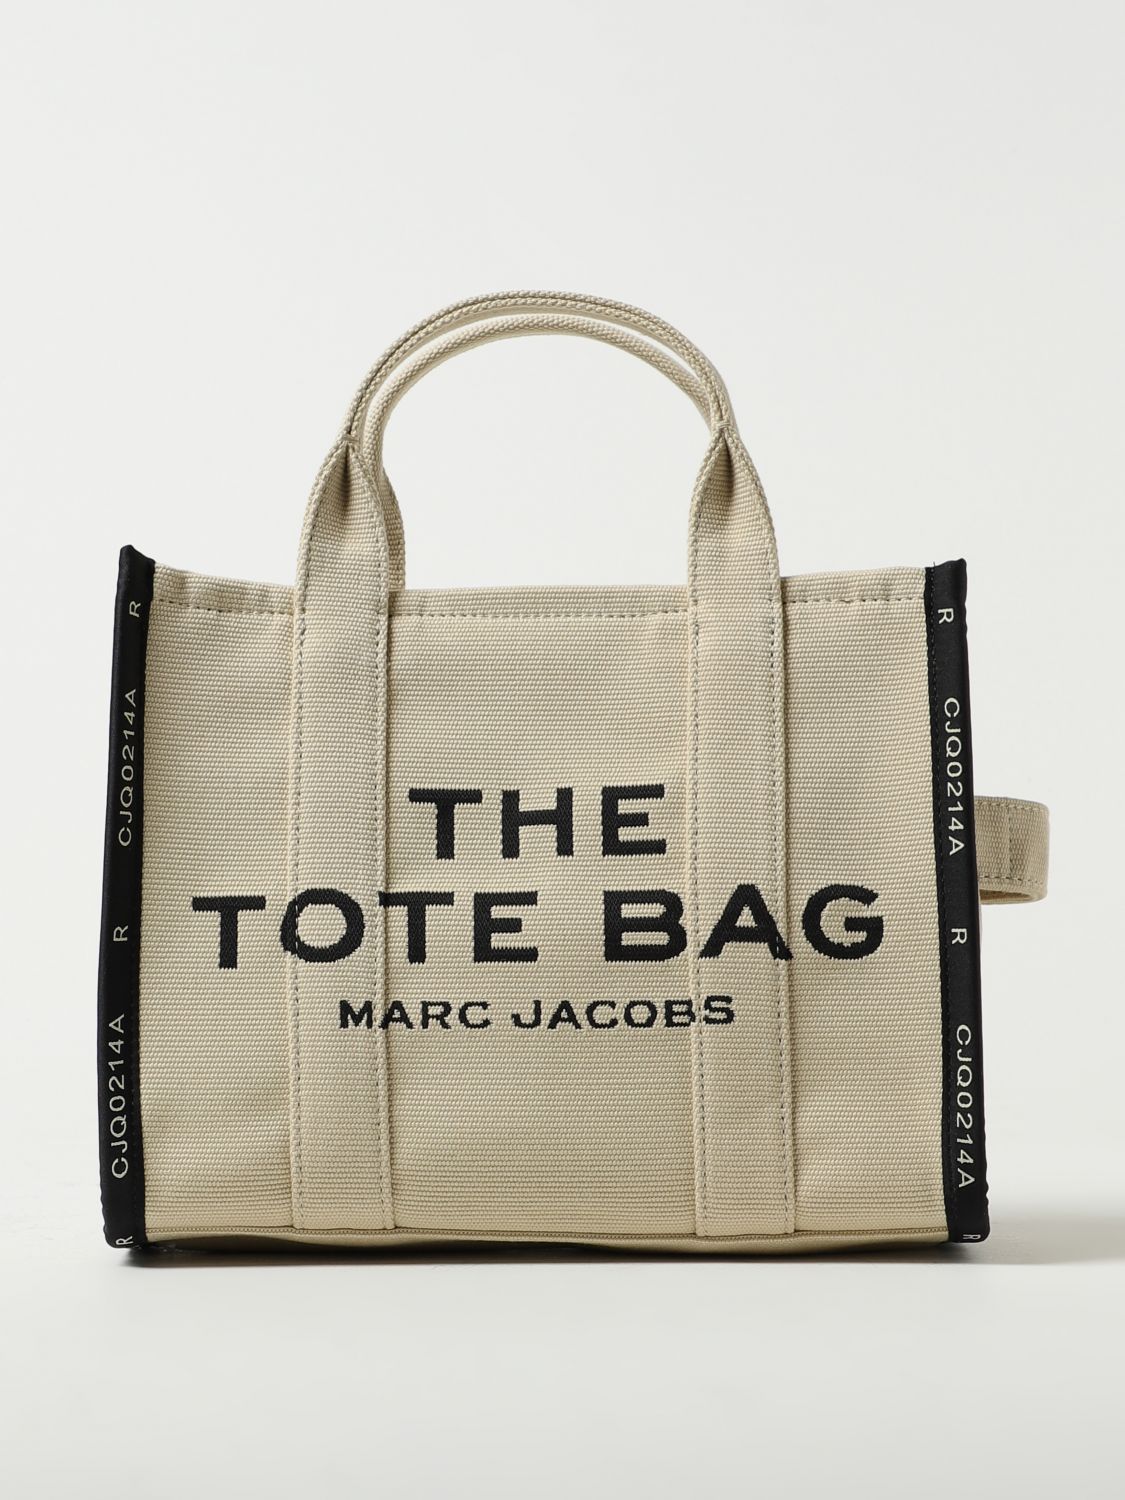 MARC JACOBS THE JACQUARD MEDIUM TOTE BAG IN CANVAS,F09970054